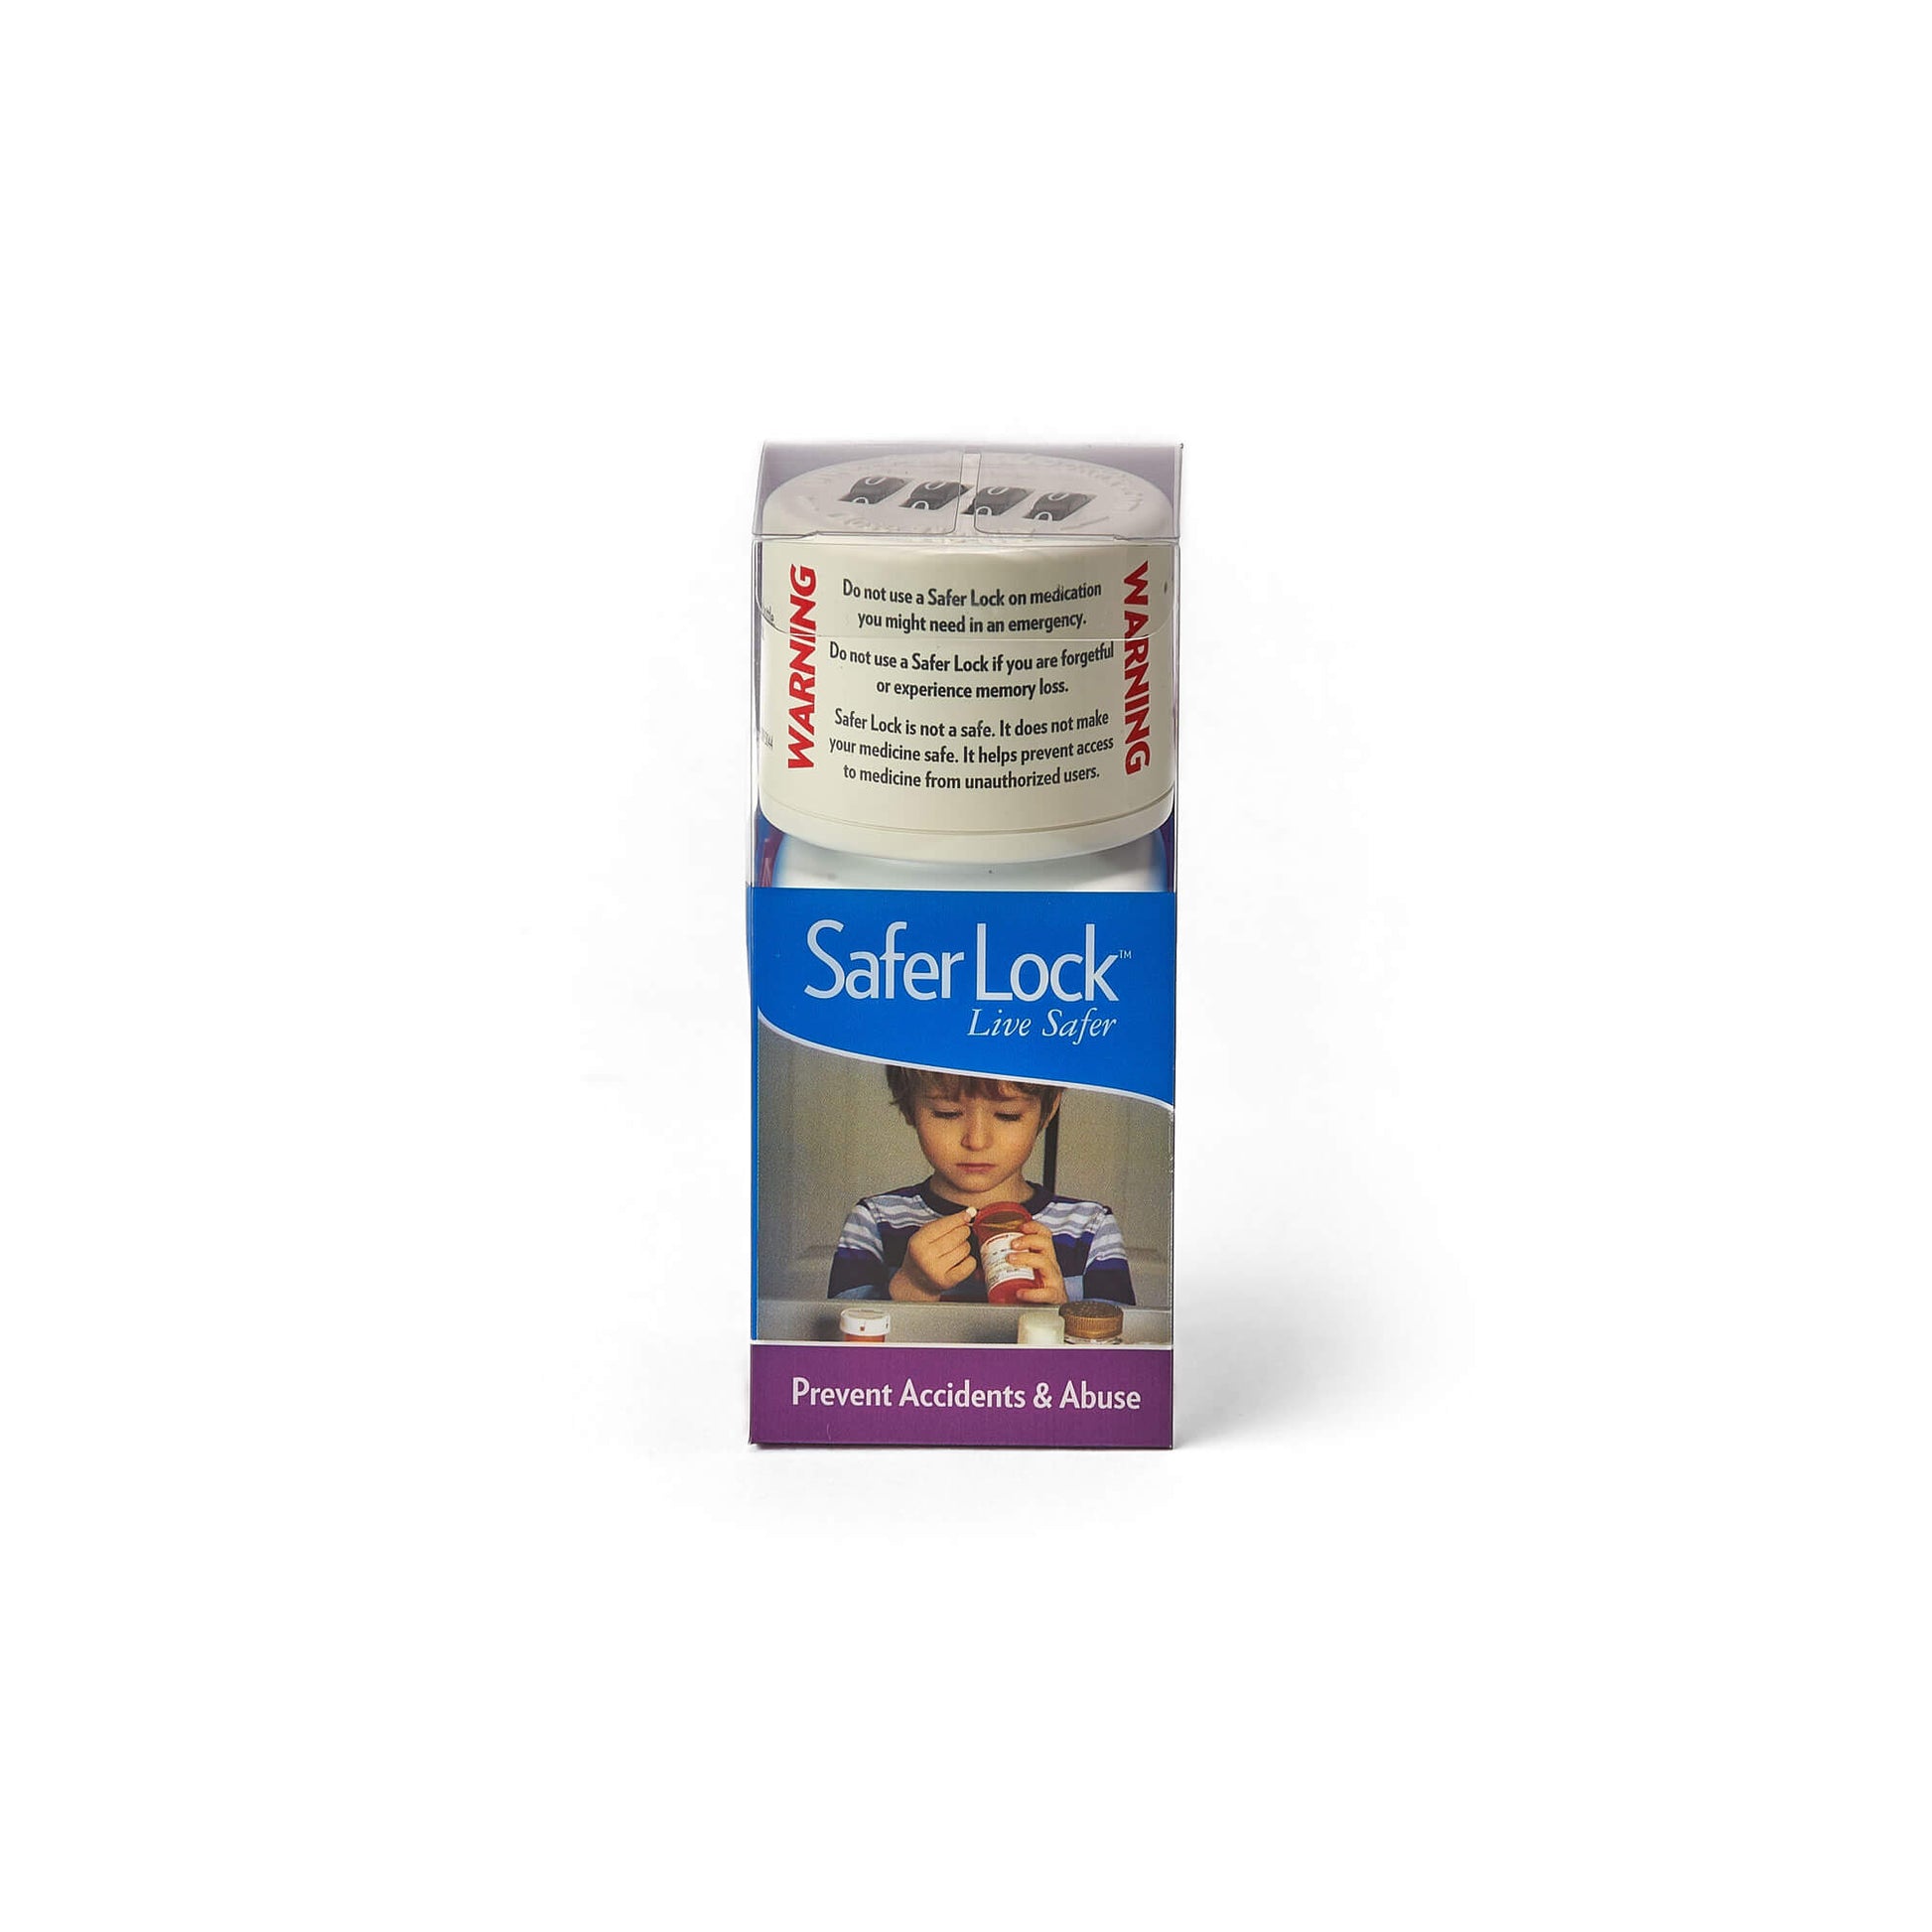 The Safer Lock product in a retail box. On the front of the box is the Safer Lock logo and an image of a young boy holding an open pill bottle. 